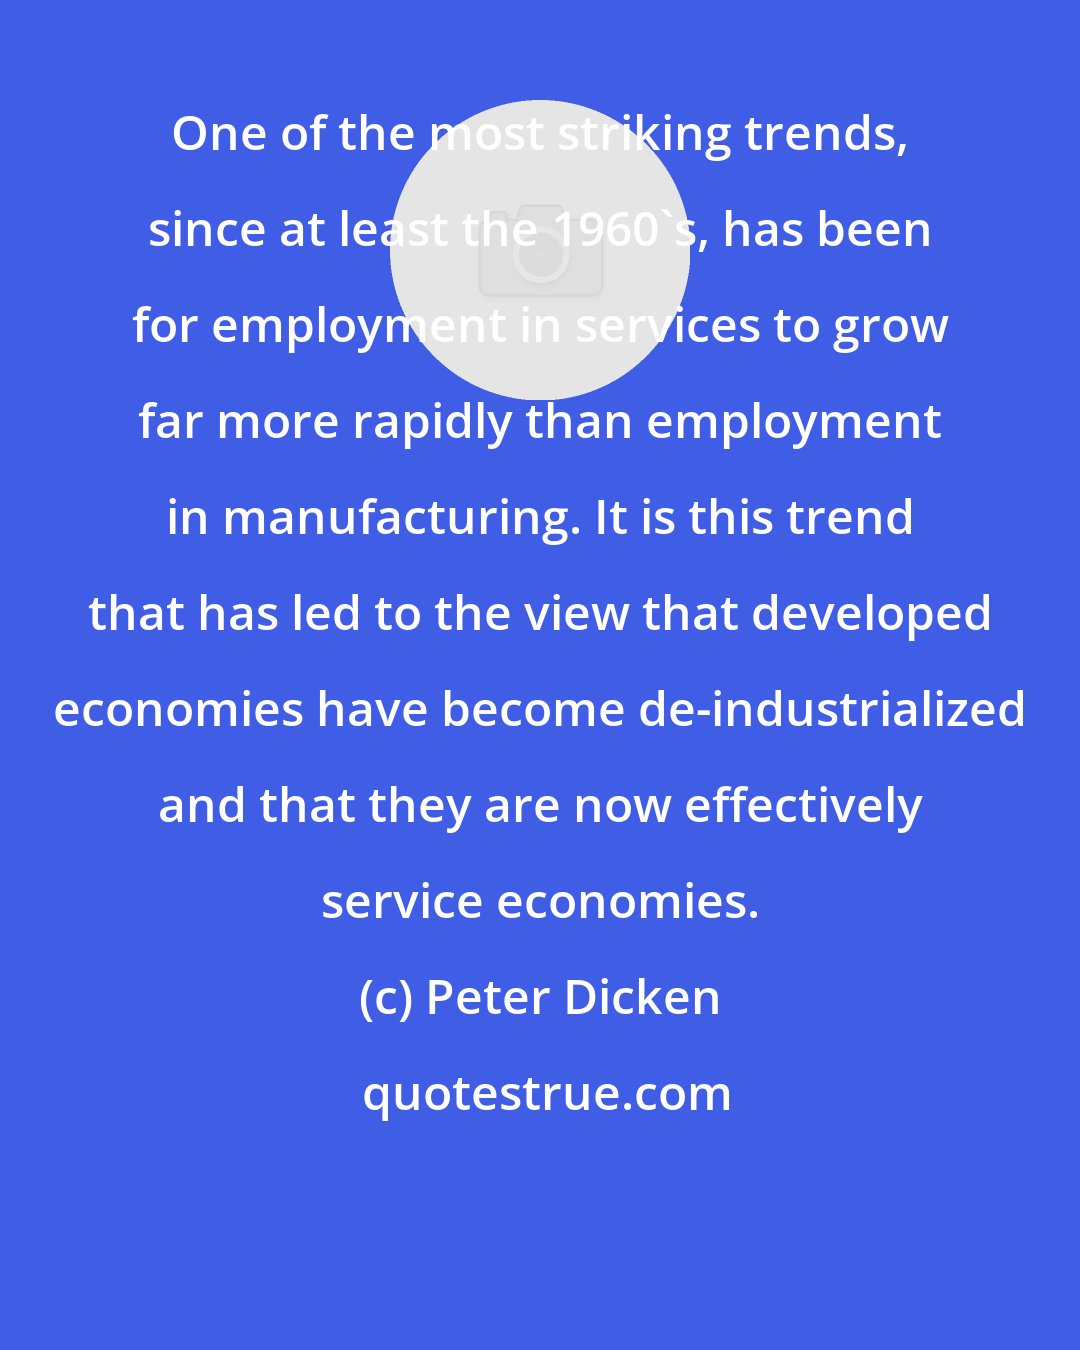 Peter Dicken: One of the most striking trends, since at least the 1960's, has been for employment in services to grow far more rapidly than employment in manufacturing. It is this trend that has led to the view that developed economies have become de-industrialized and that they are now effectively service economies.